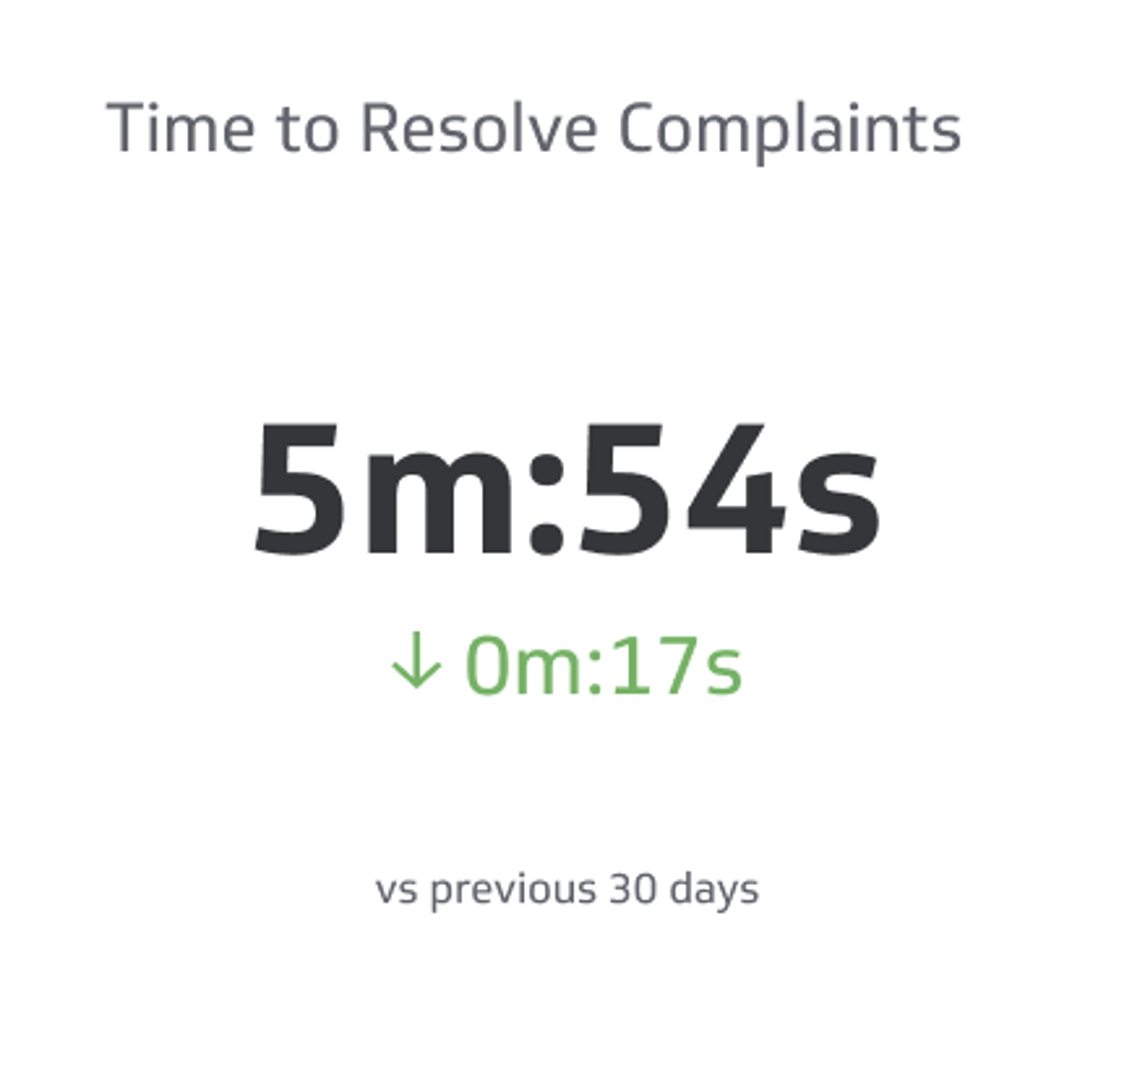 Support KPI Examples - Time to Resolve Complaints Metric